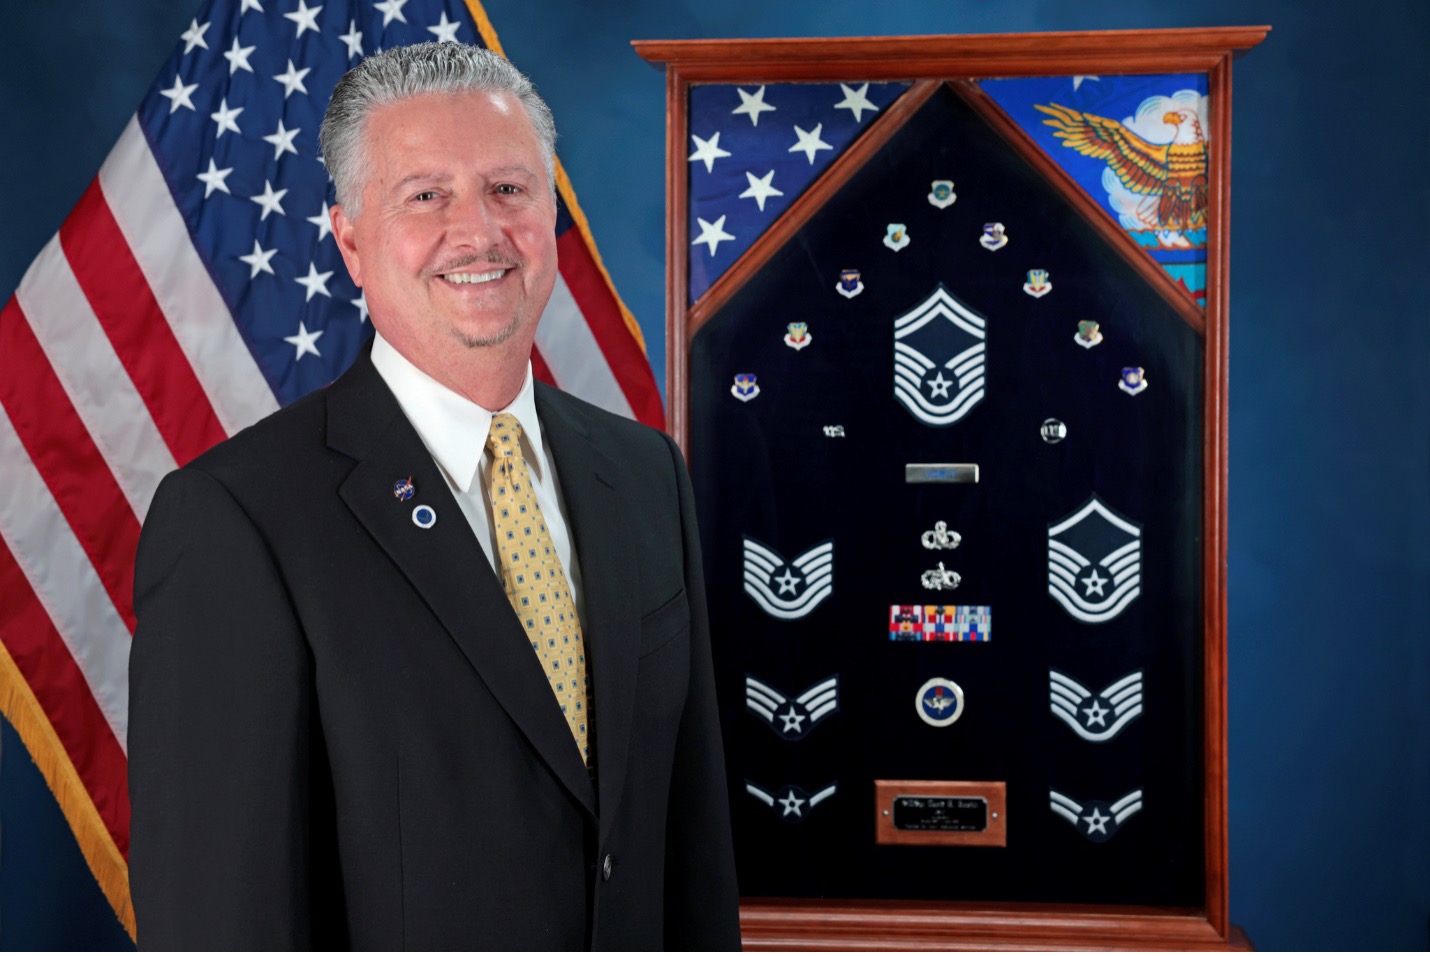 A man wearing a black suit stands with his shadow box full of military medals in front of an American Flag.